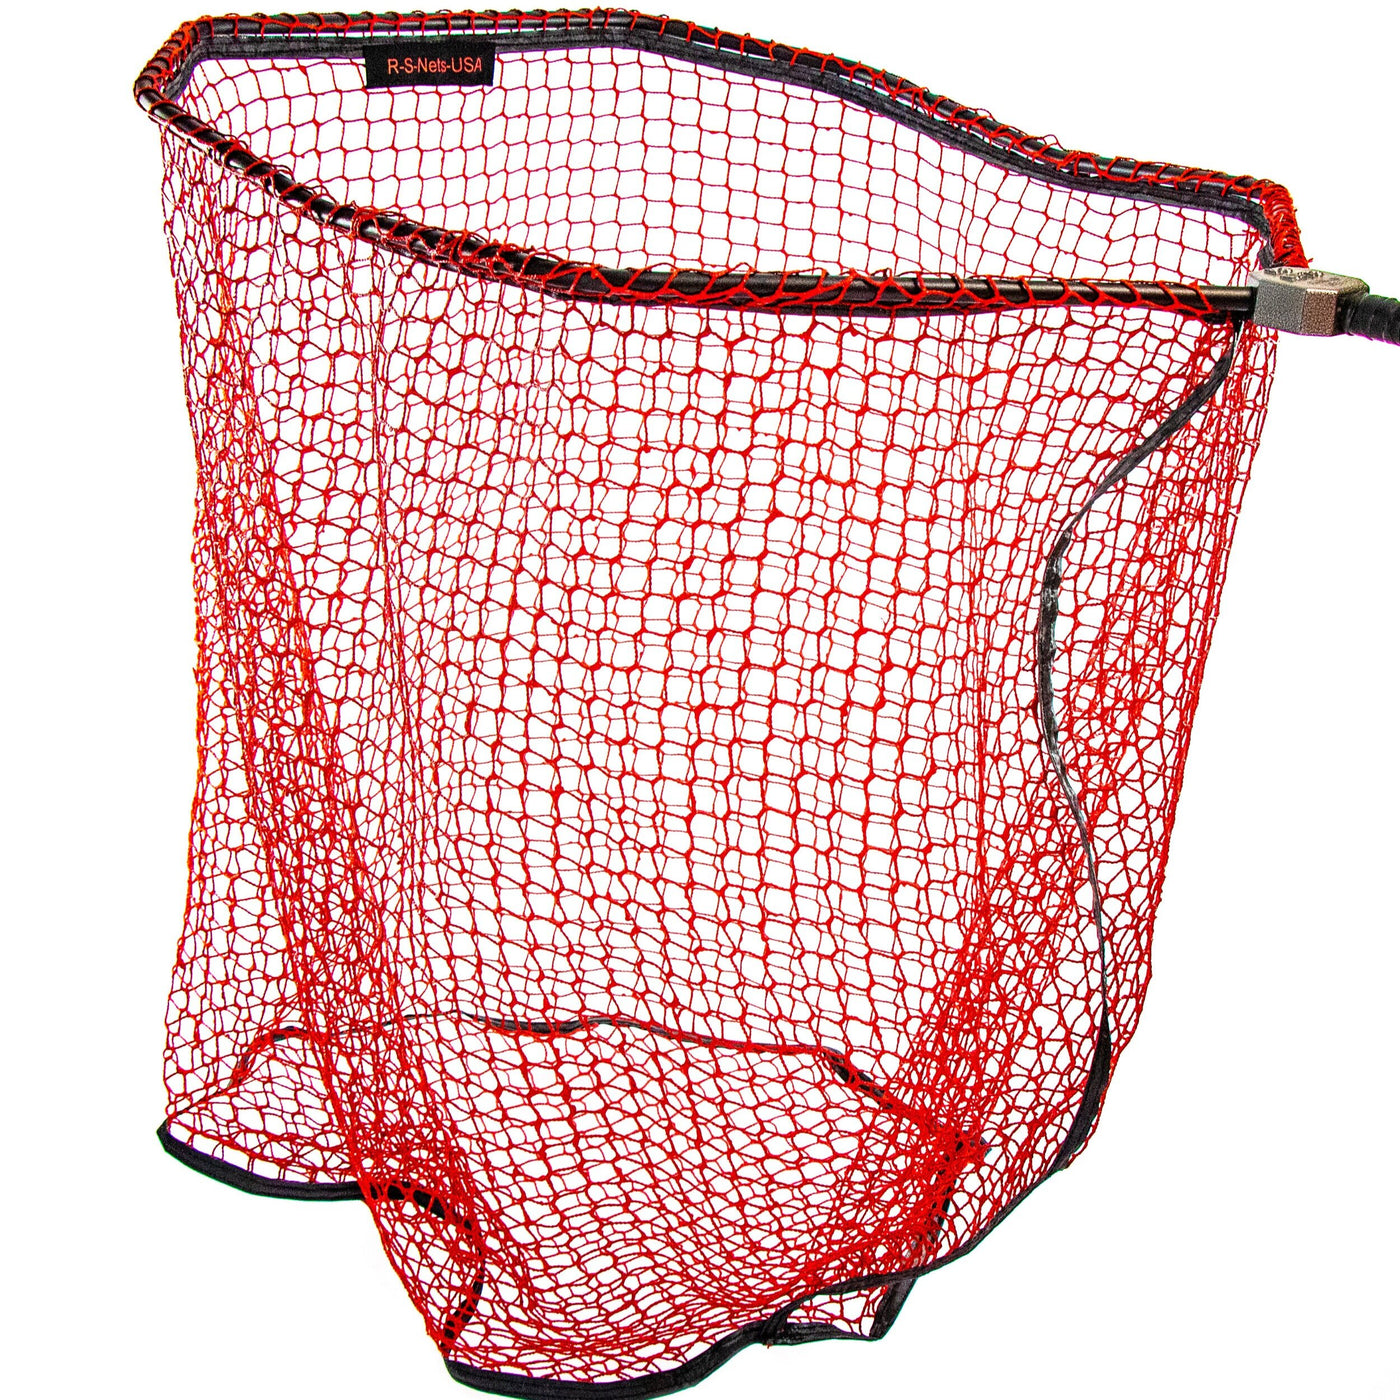 Buy fishing tackle landing net Online in Seychelles at Low Prices